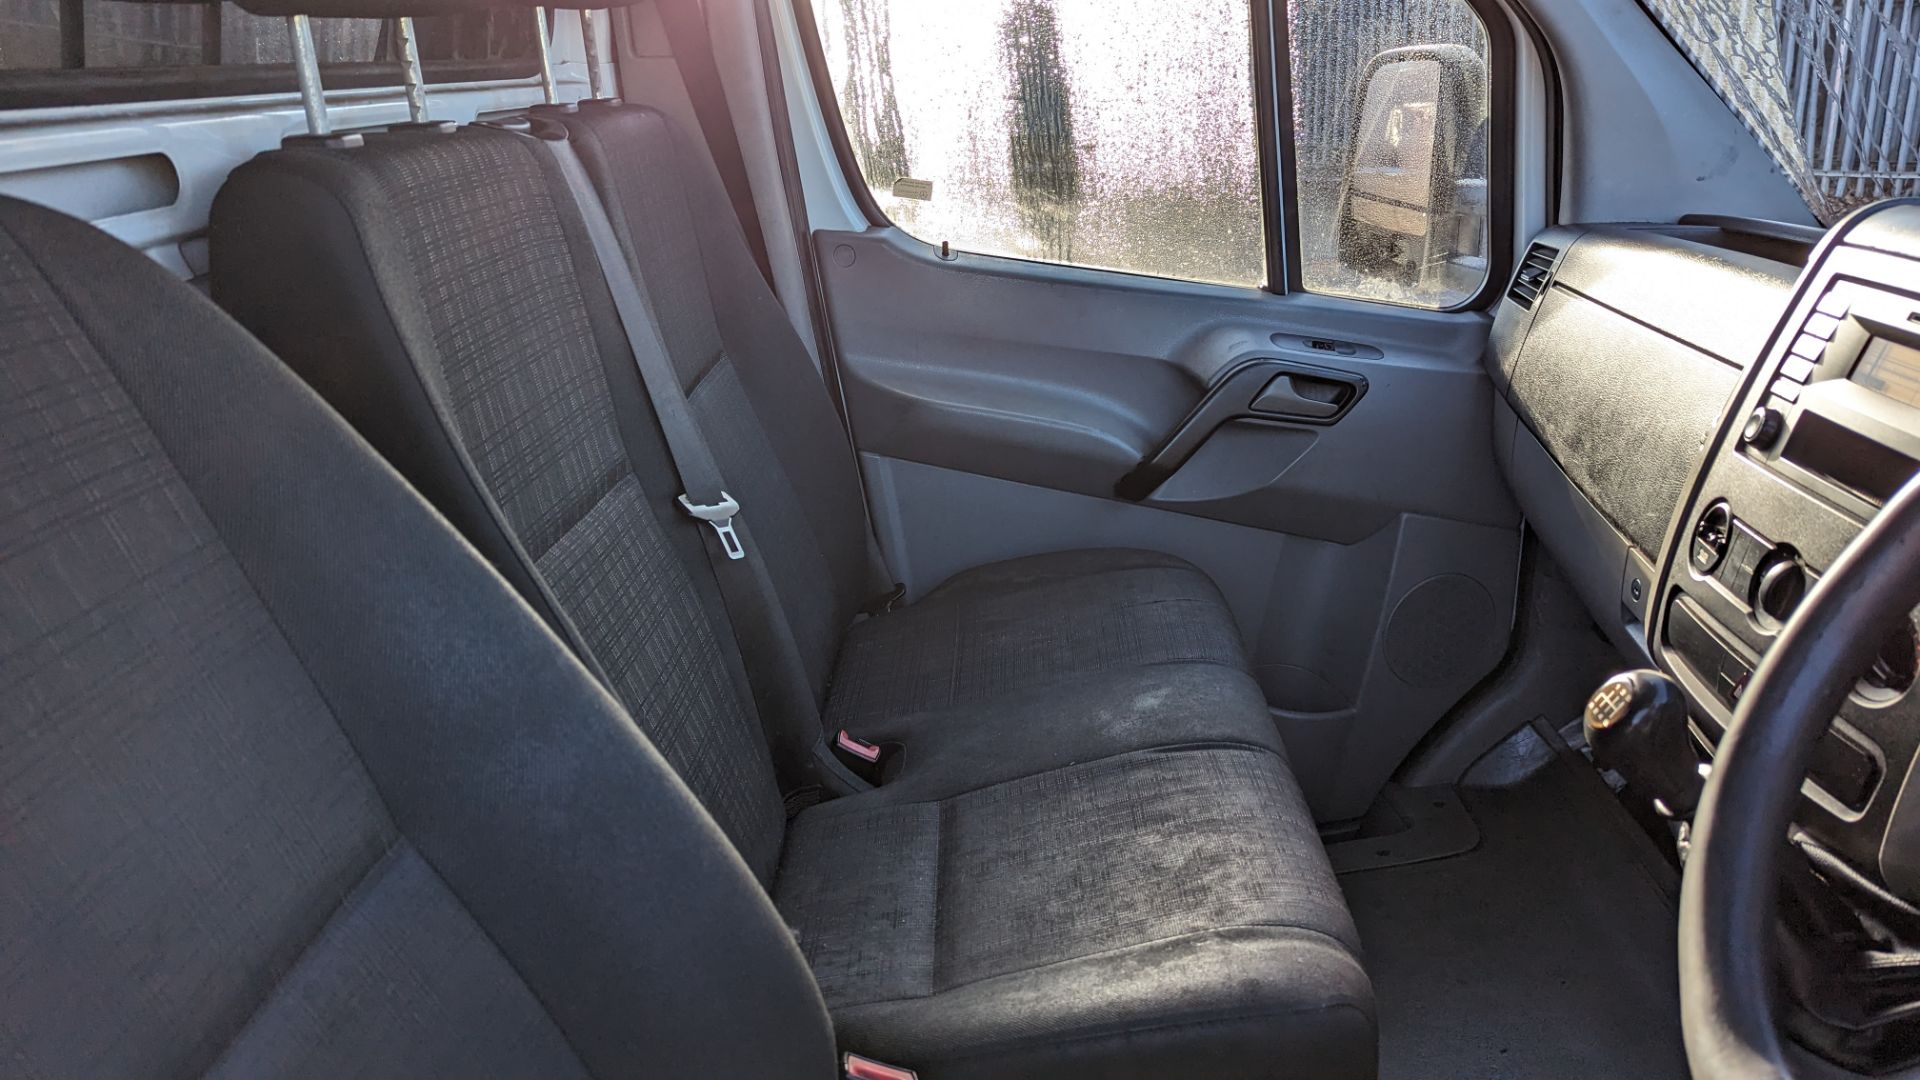 KX65 UDJ, Mercedes Sprinter 313 CDI featuring curtain side on the passenger side and solid side on t - Image 16 of 21